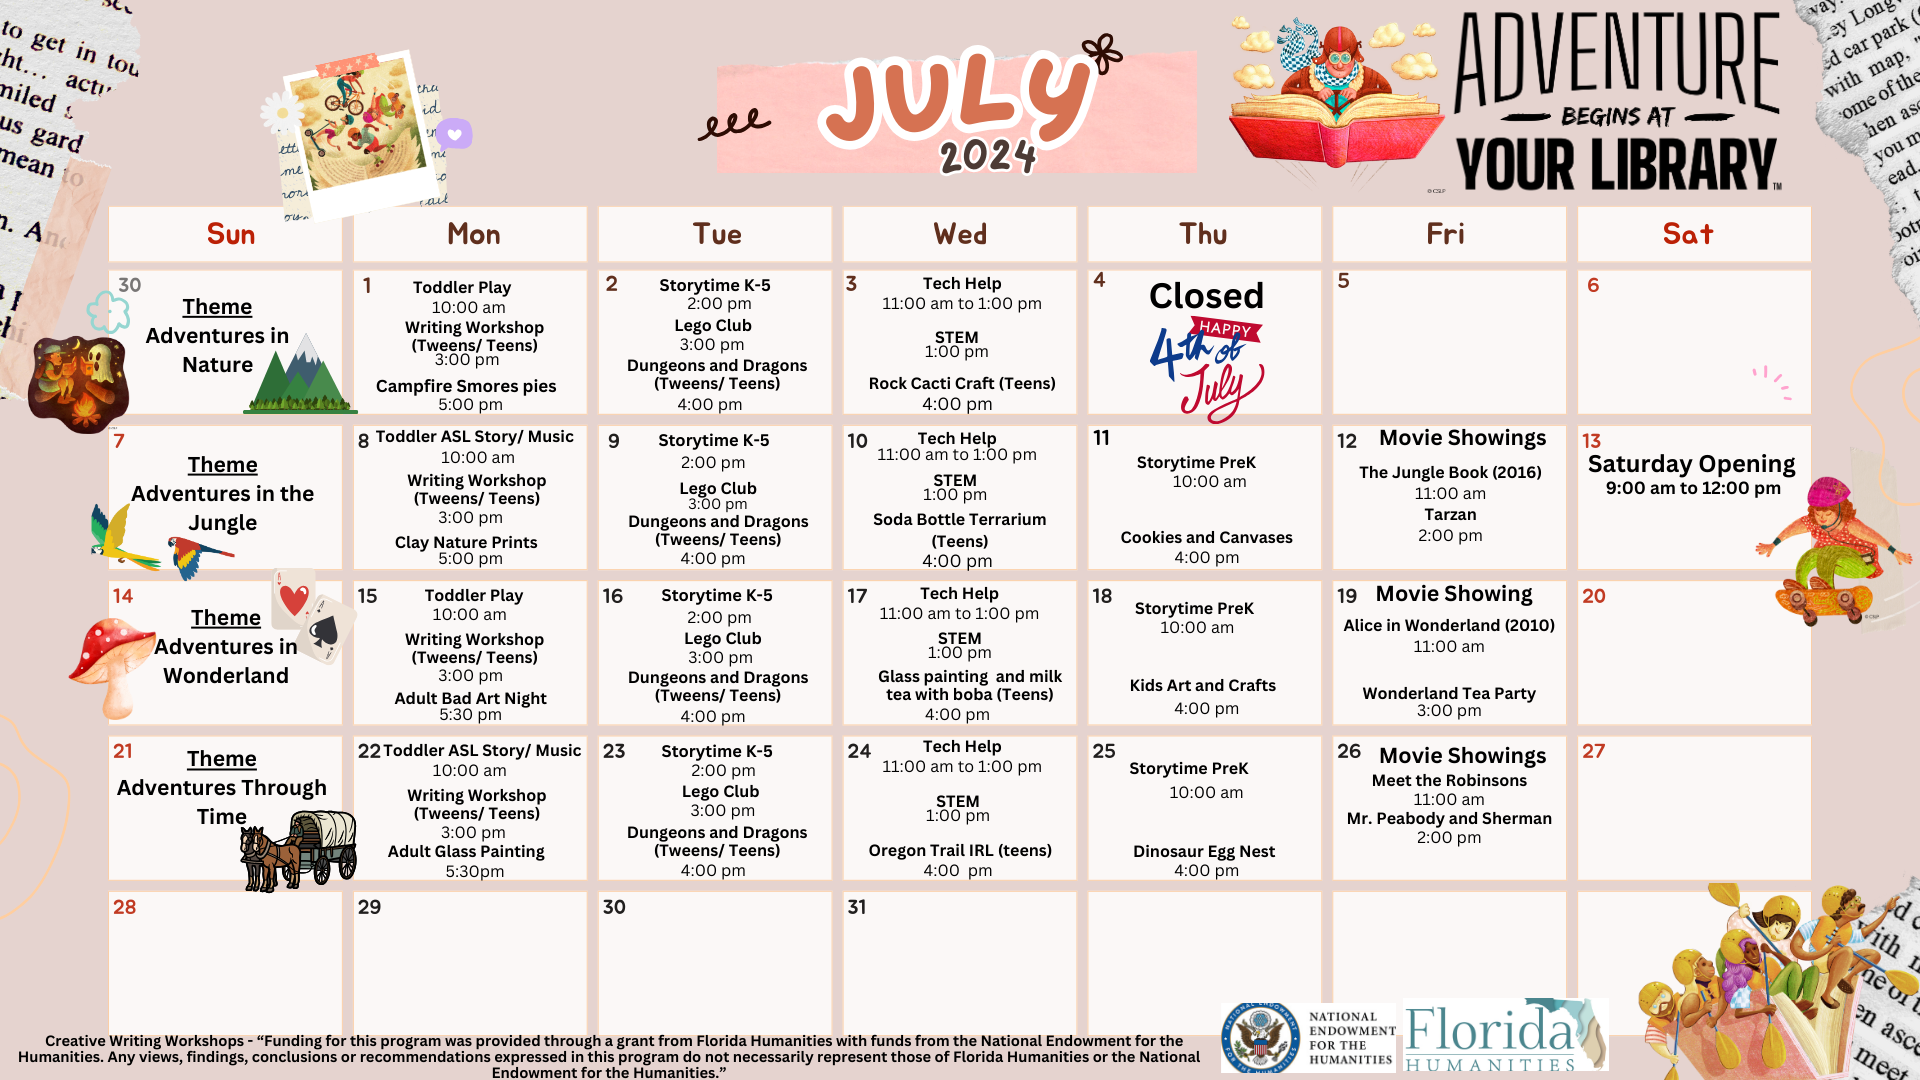 Image of Hardee's July calendar of events. Click the image for the PDF version.